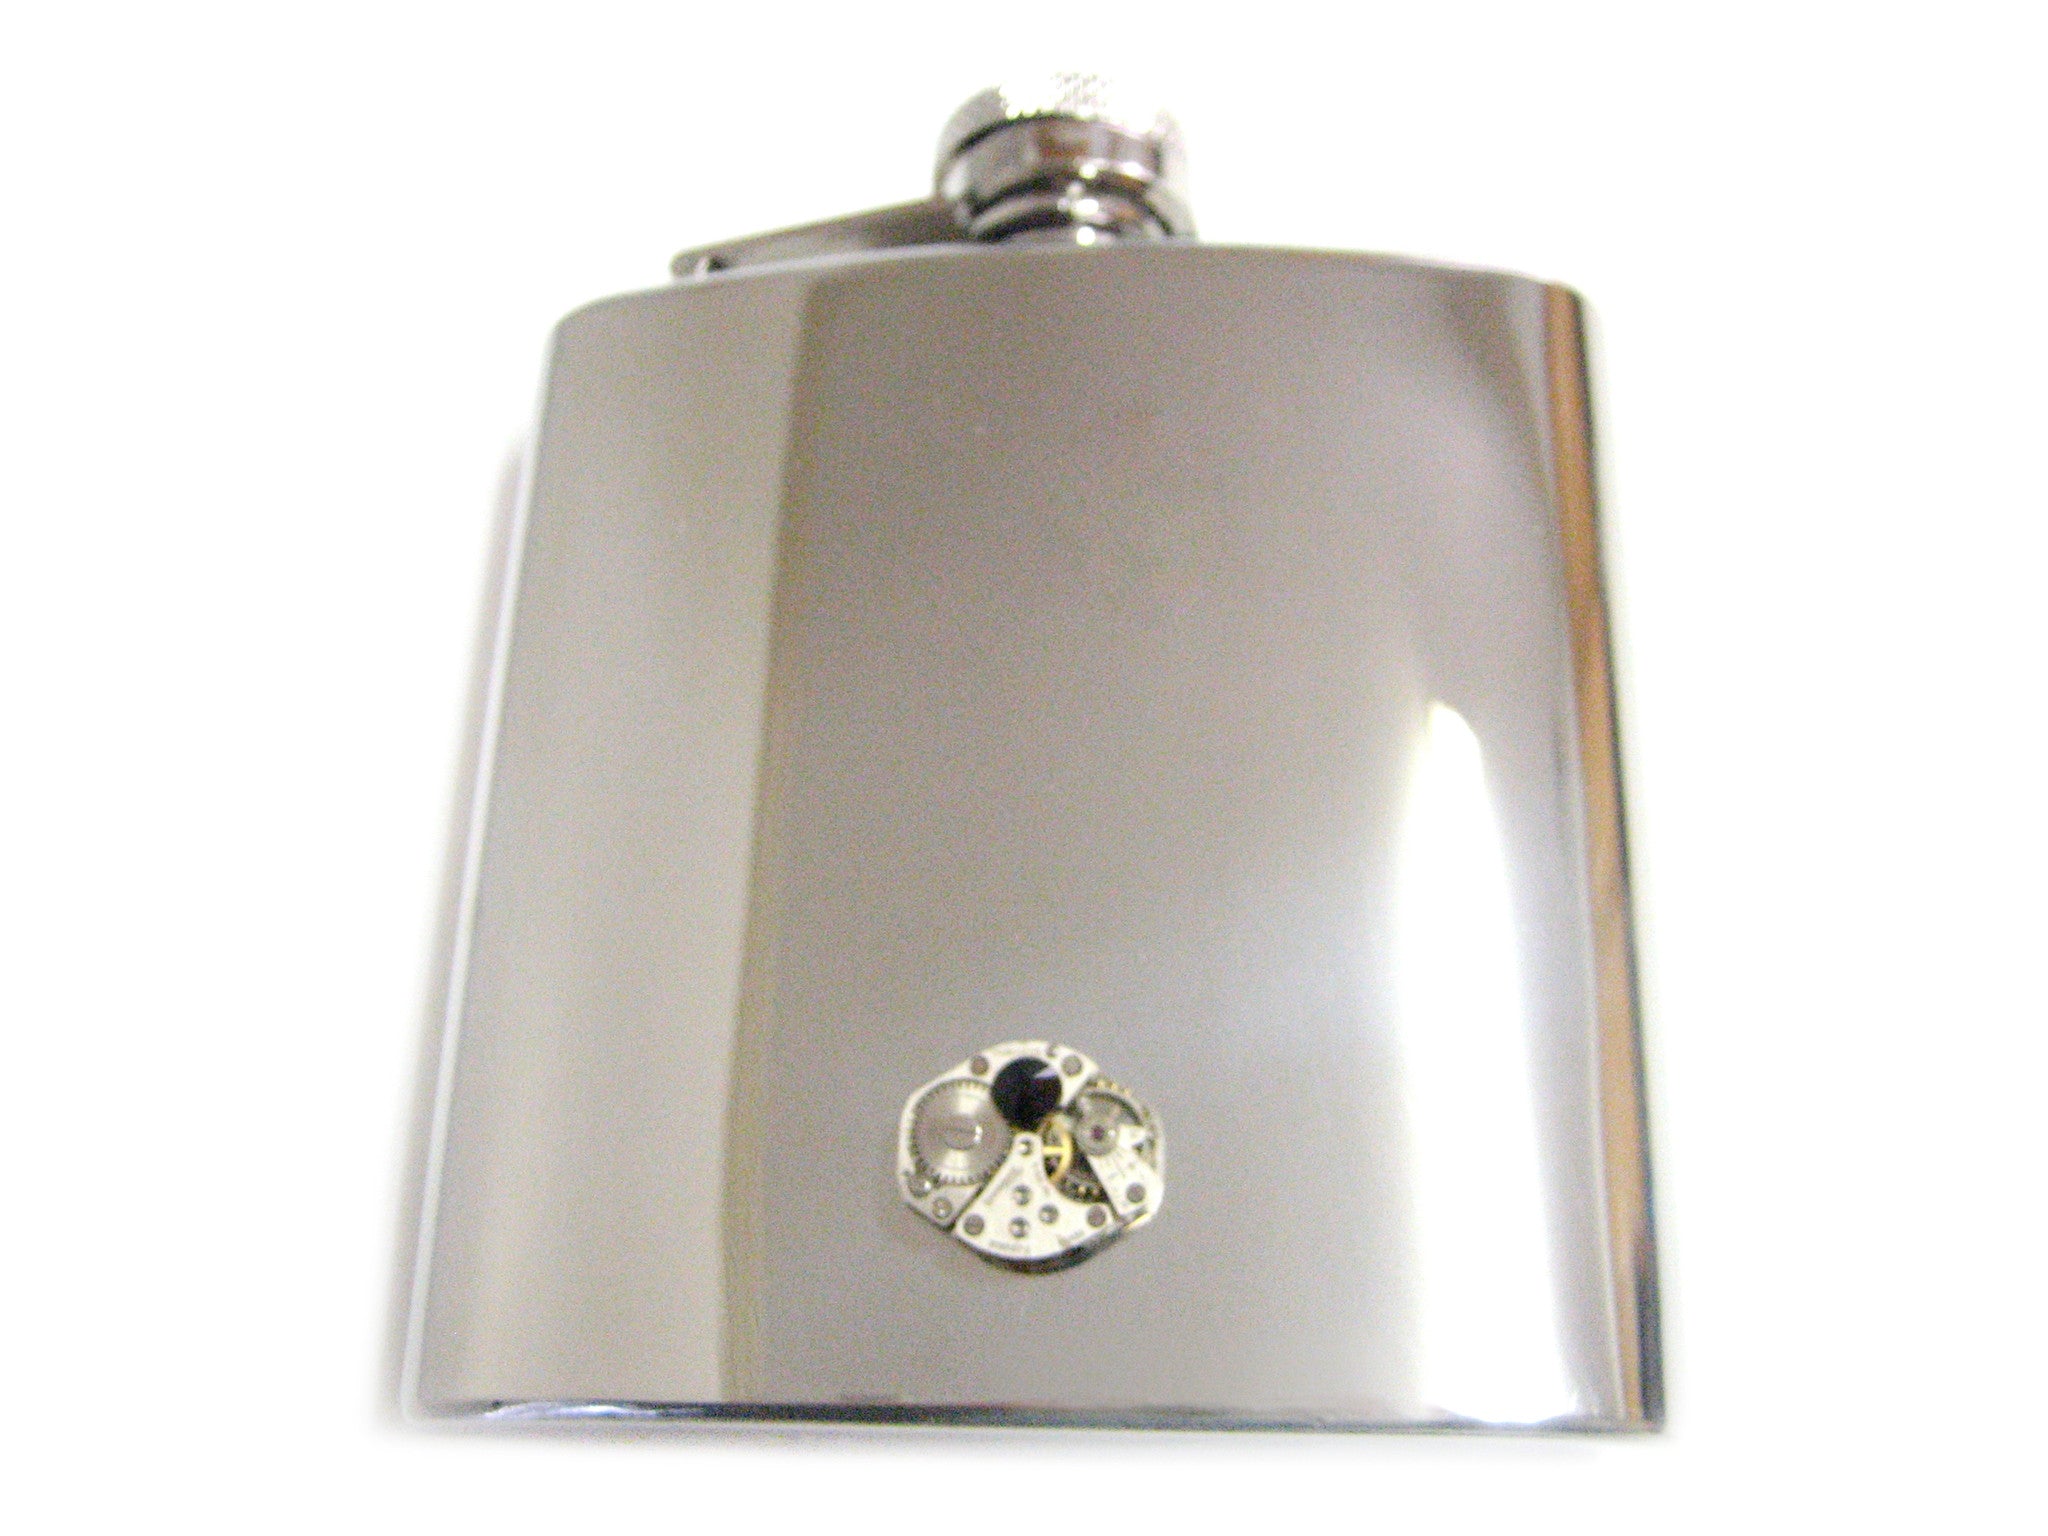 6 Oz. Stainless Steel Flask with Steampunk Watch Gear Pendant and Black Swarovski Crystal